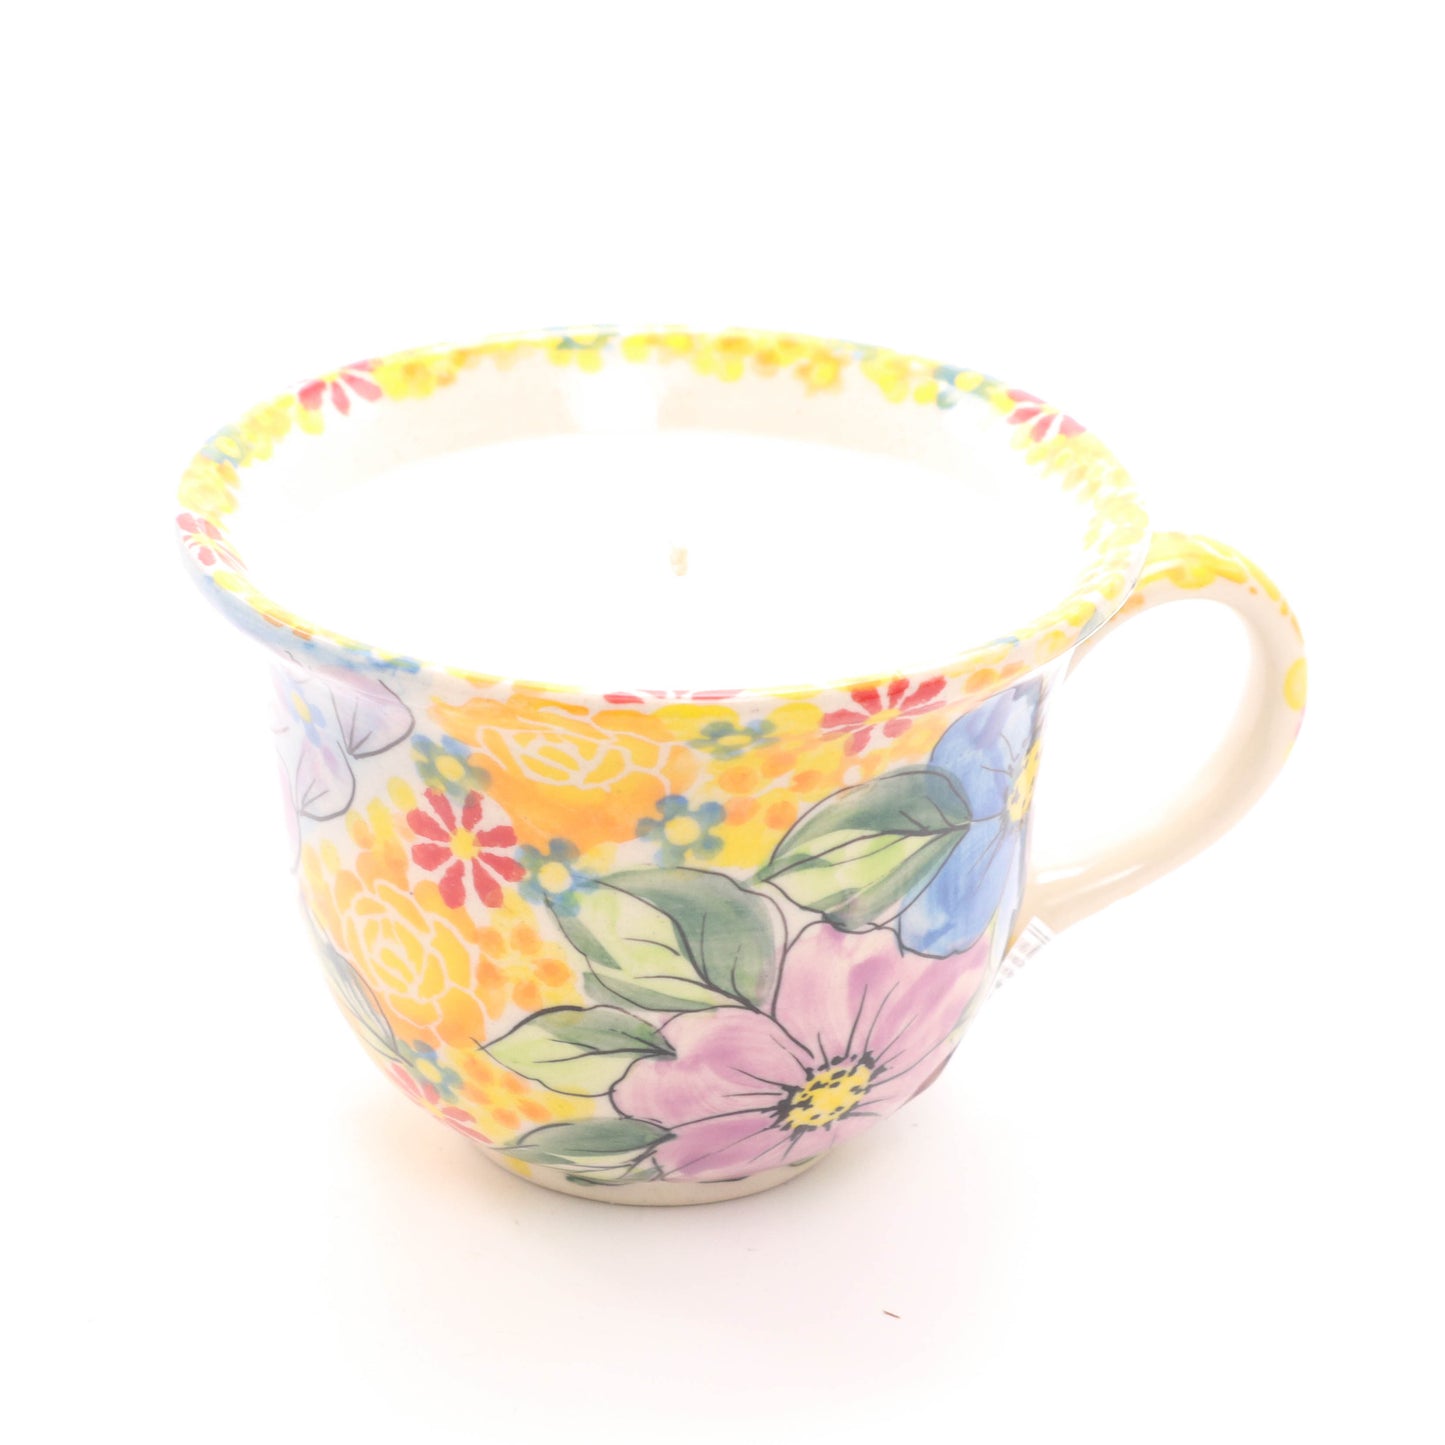 7oz Tea Cup Candle with Saucer. Pattern: A26. Scent: Dogwood Blossom